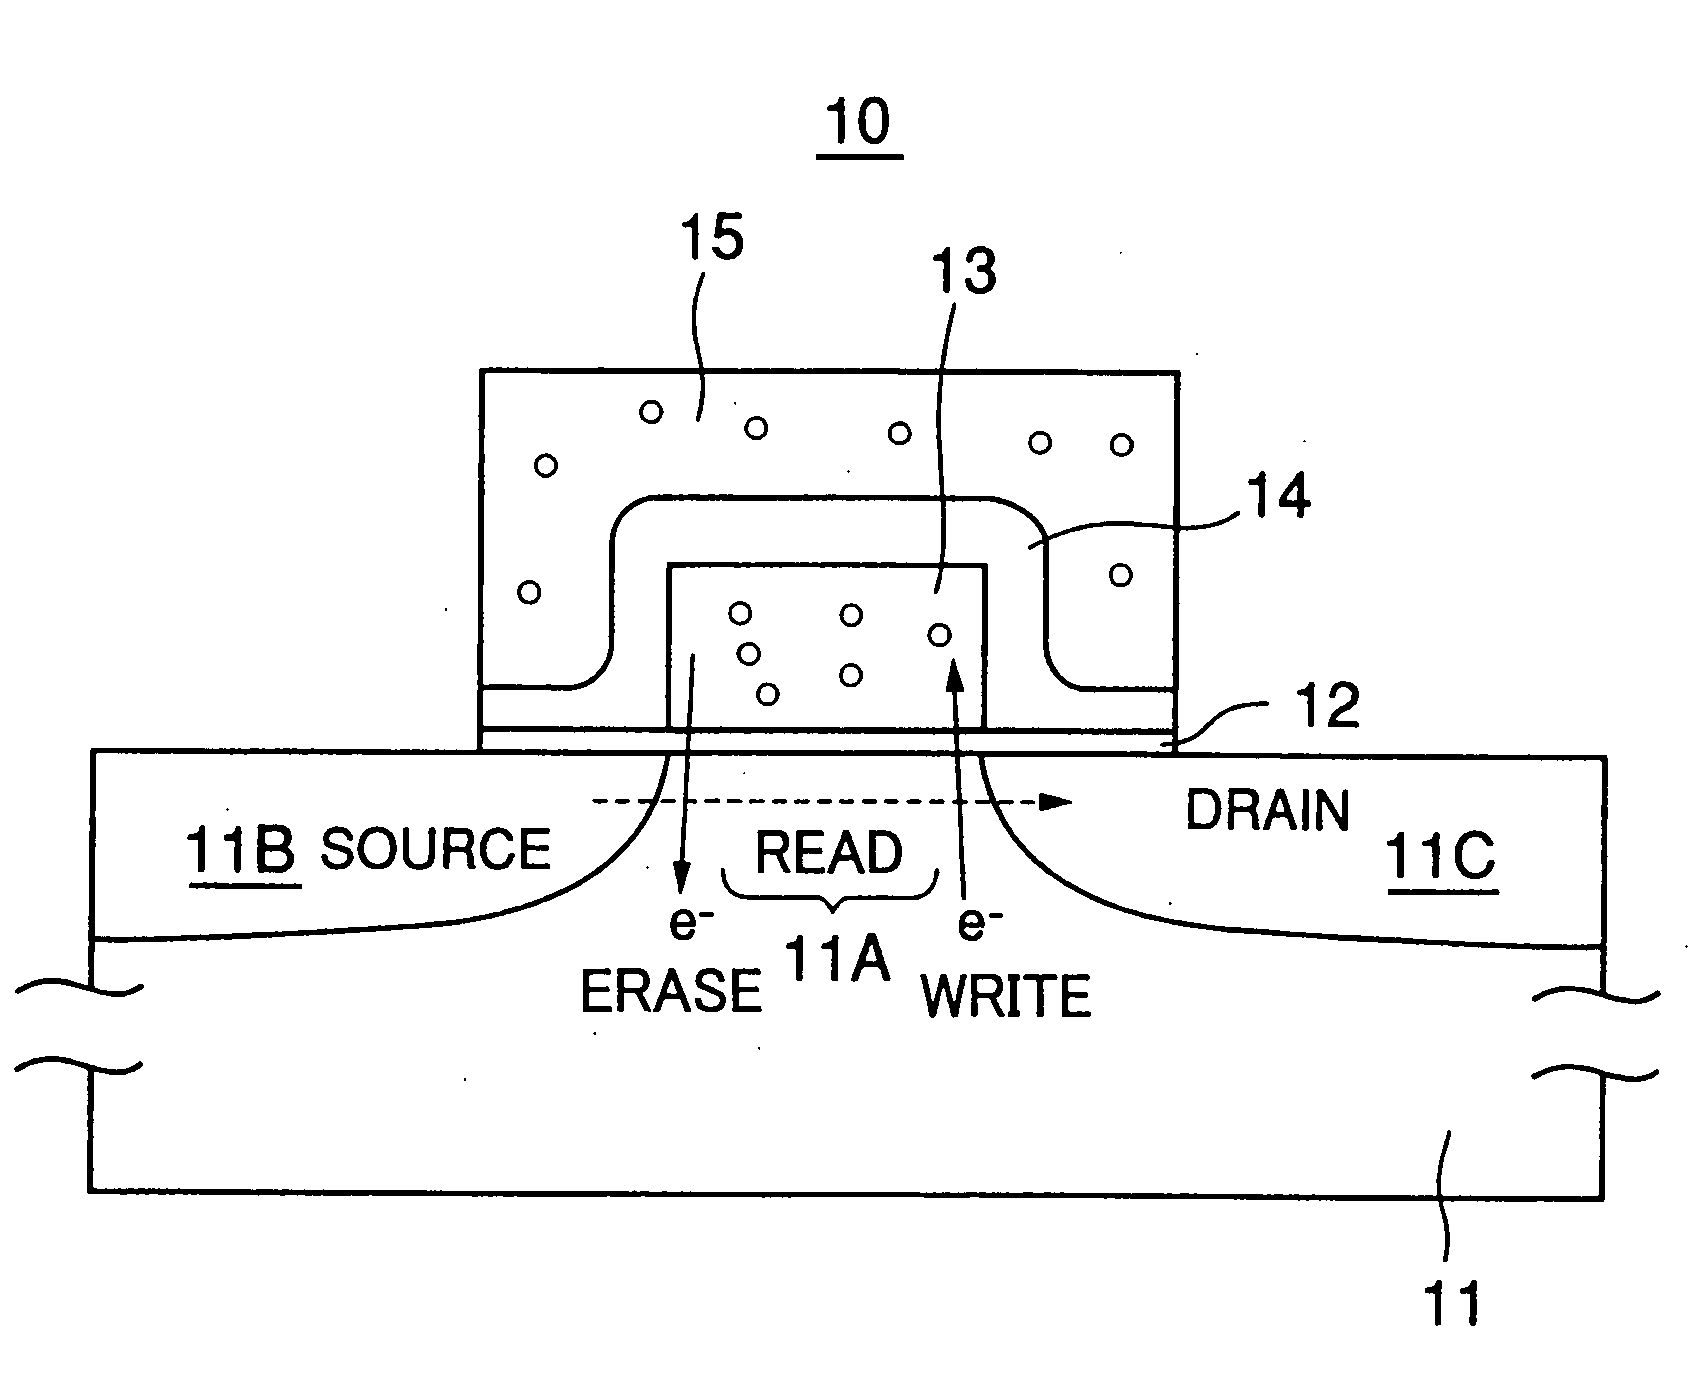 Dielectric film and formation method thereof, semiconductor device, non-volatile semiconductor memory device, and fabrication method for a semiconductor device